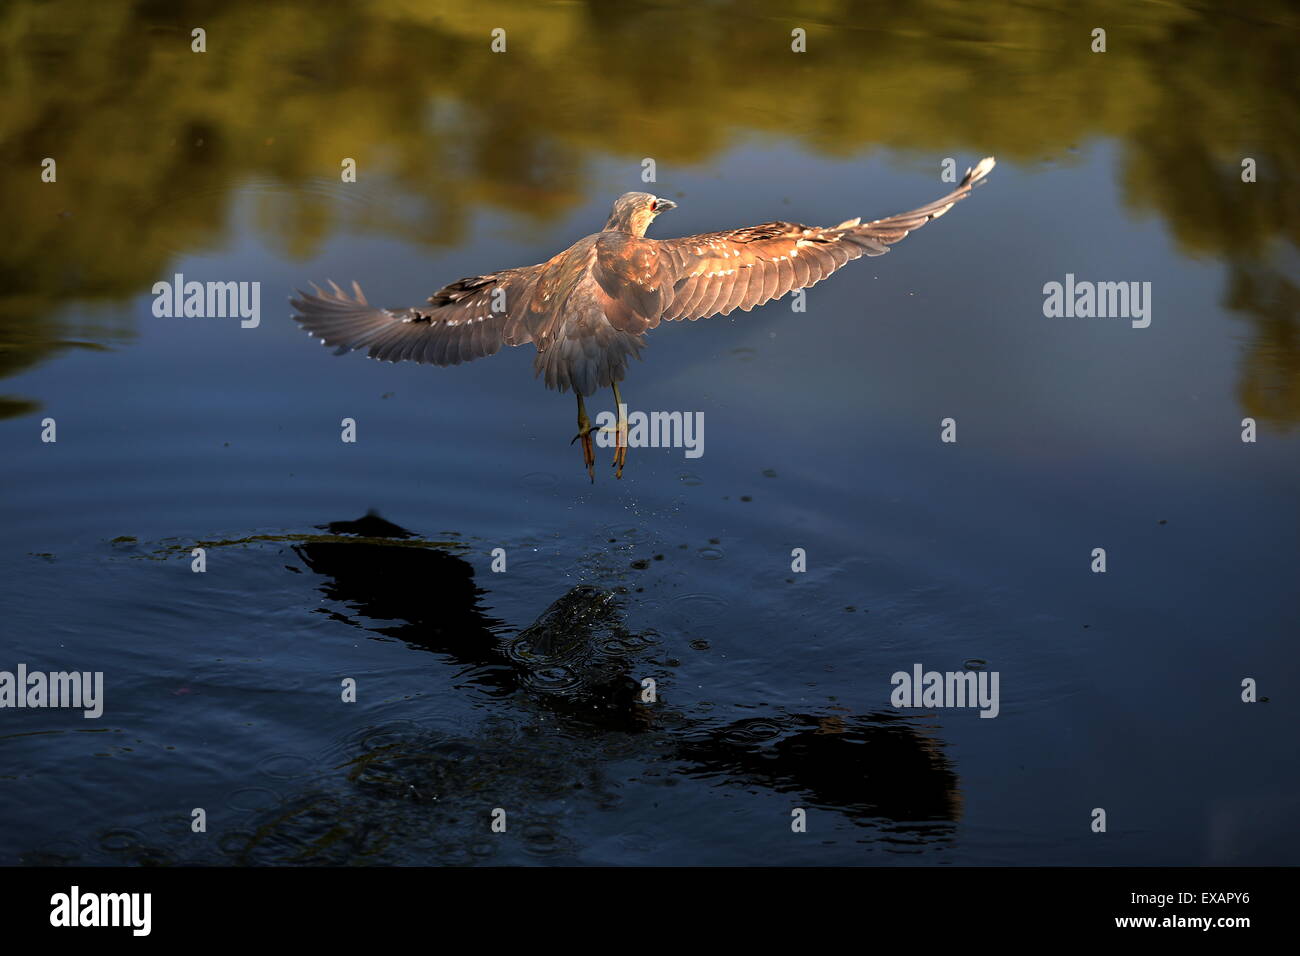 A Black-crowned night heron flys near a river in Natong, Jiangsu province, China on 17th May 2015. Stock Photo